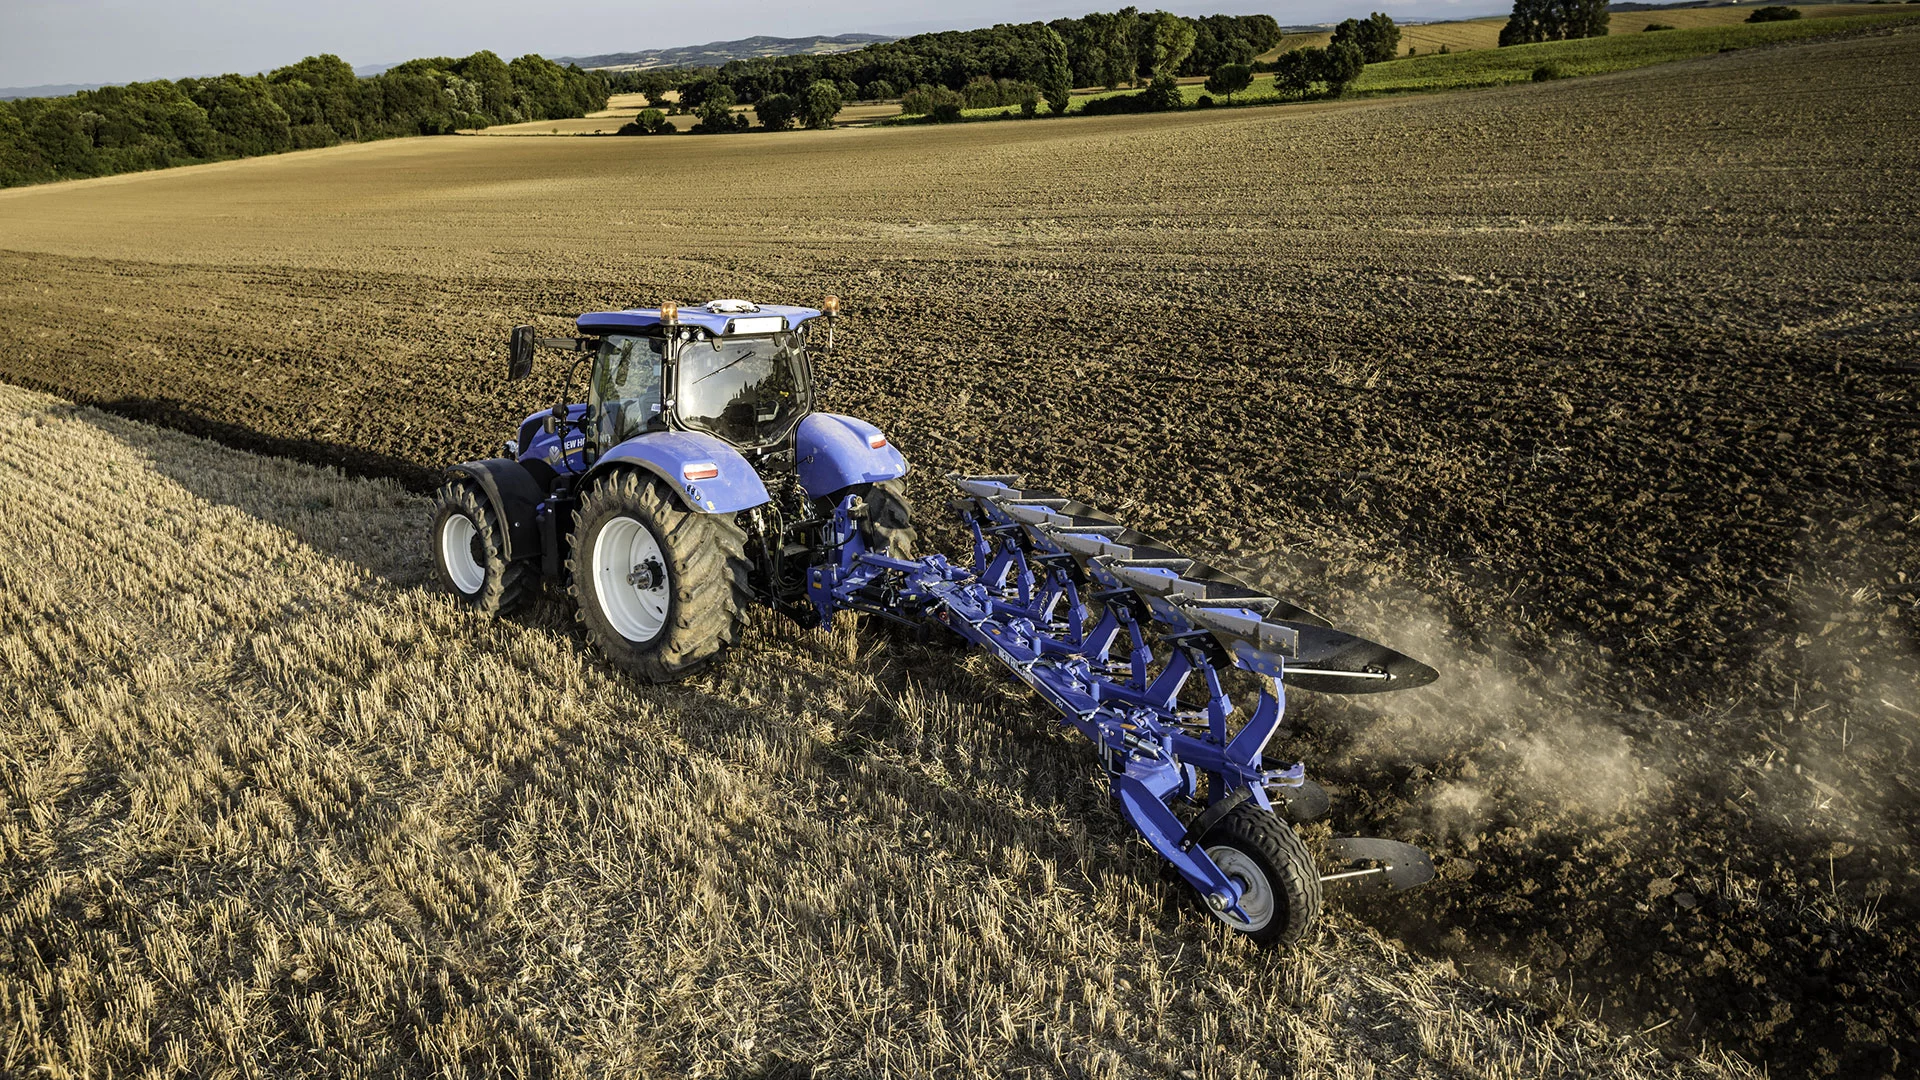 Tractor with a 5 furrow fully-mounted plough working on the field